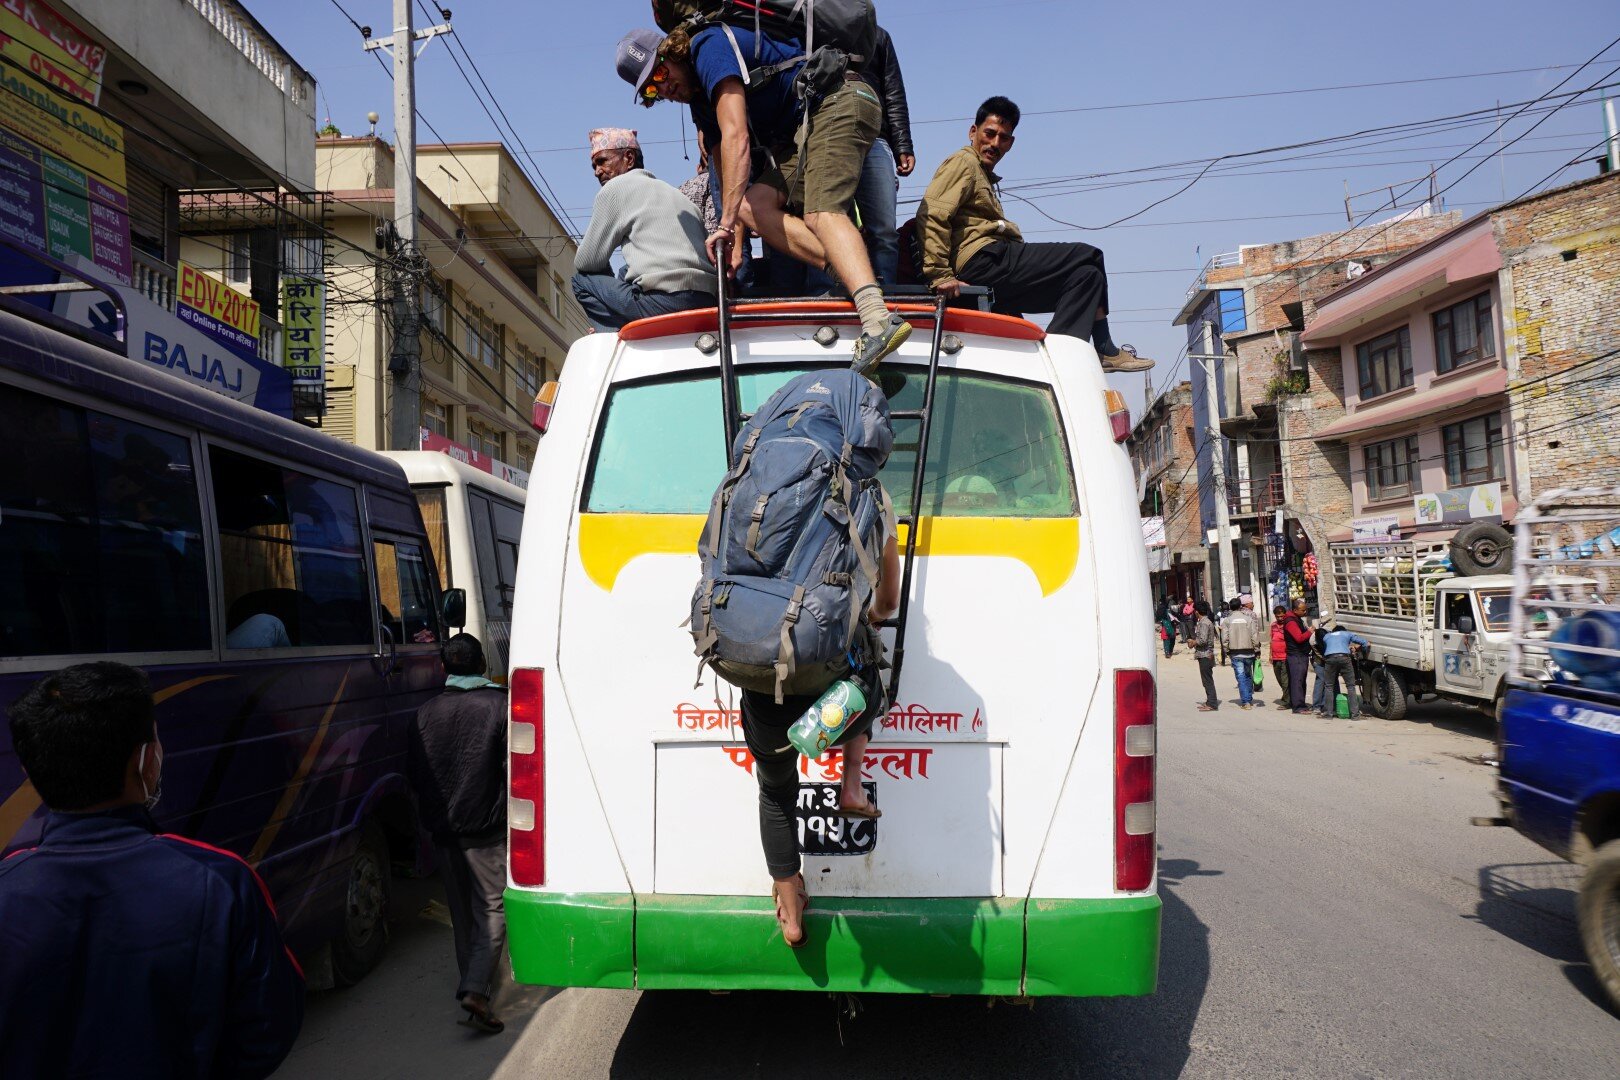  Climbing atop a bus during the fuel crisis in Nepal, post Earthquake 2015. We were taking a bus out to a village near Kathmandu with some sport climbing.  